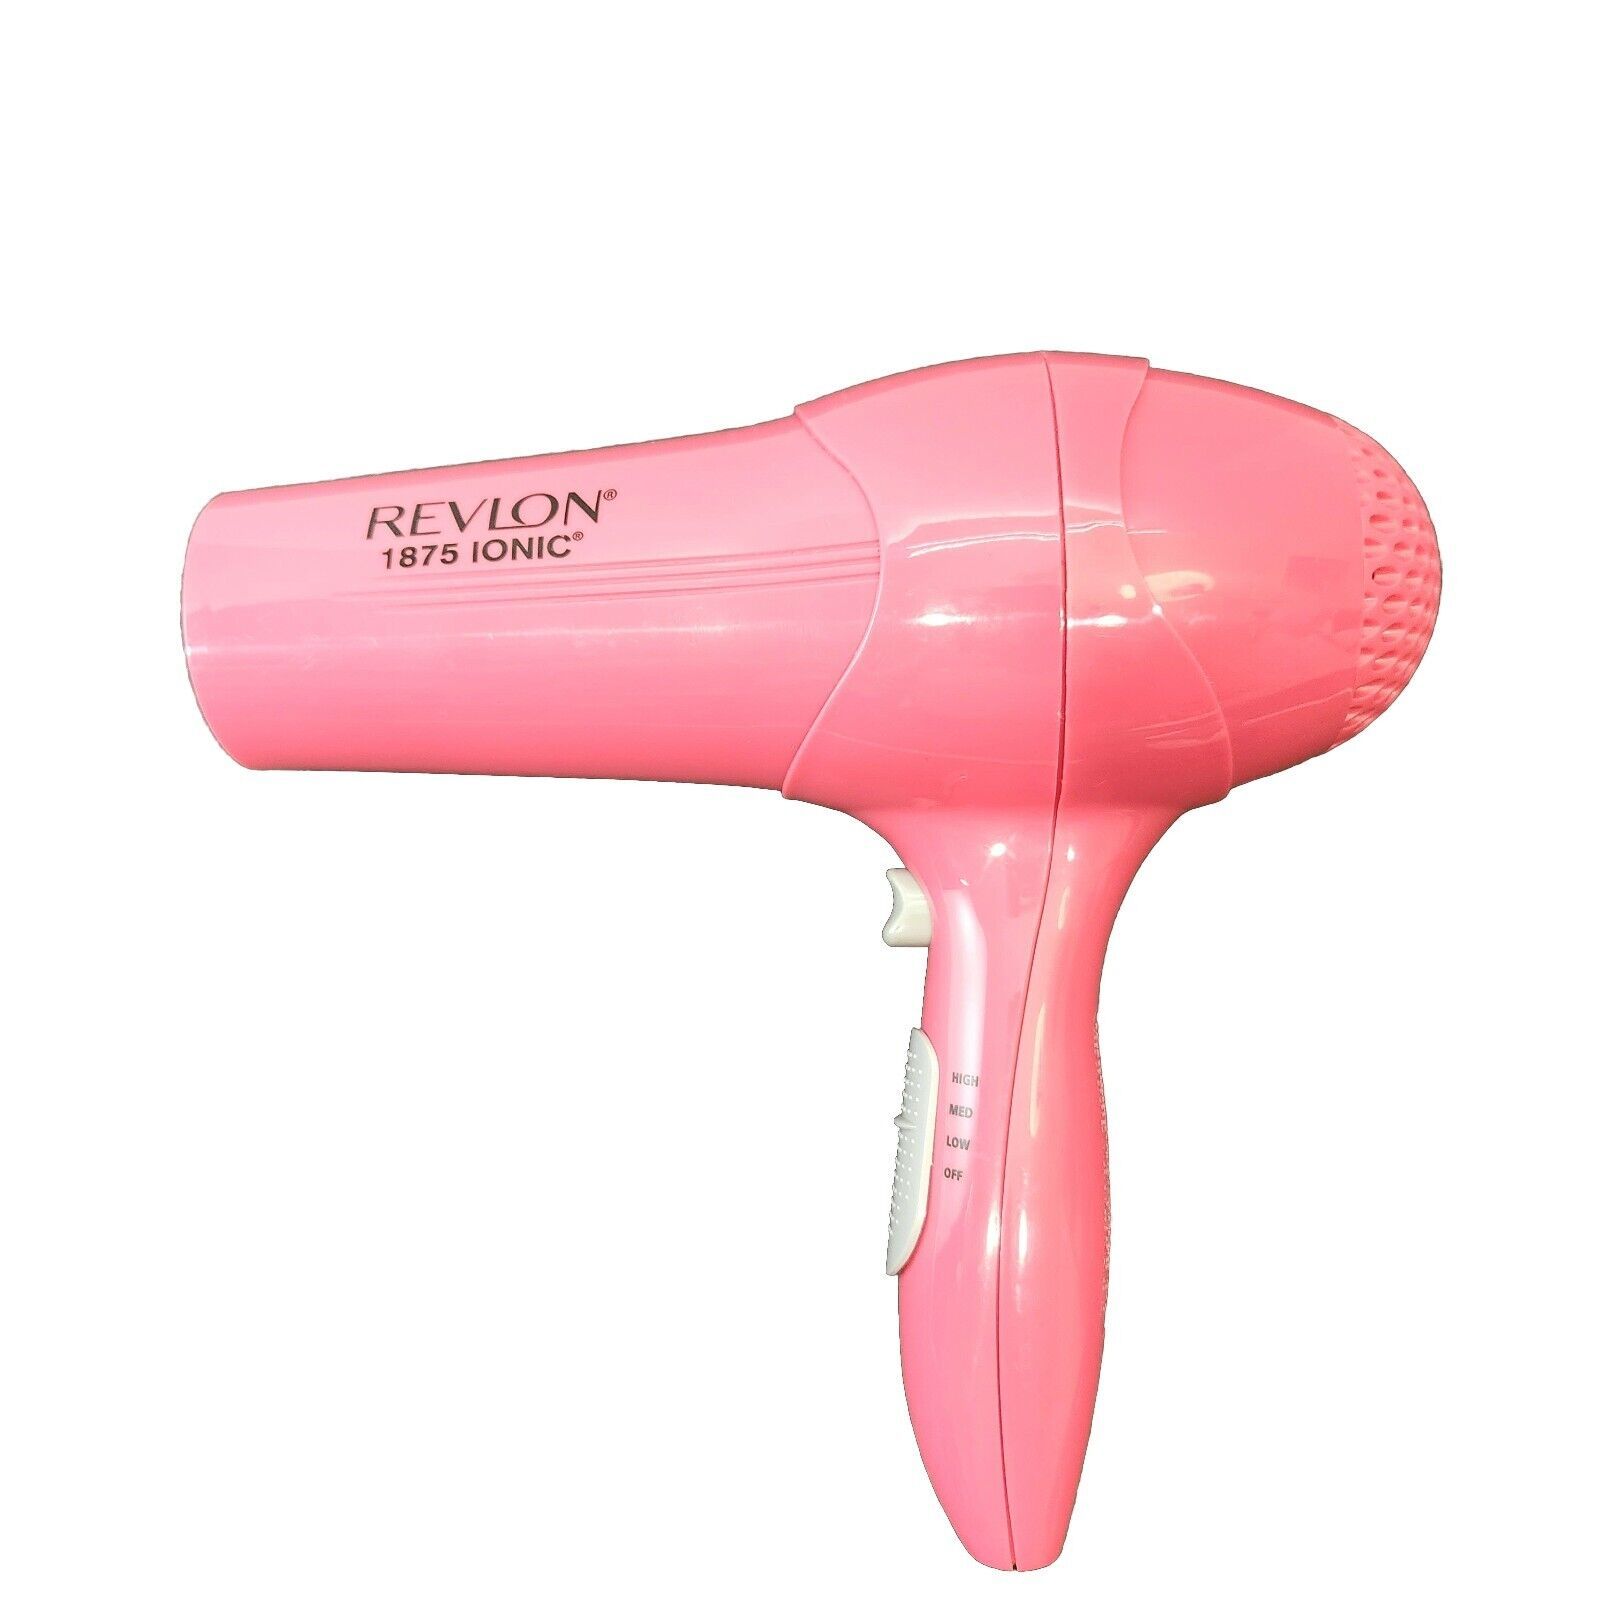 Revlon Ionic 1875W - Lightweight Basic Hairdryer - Preowned, Pink - £7.42 GBP